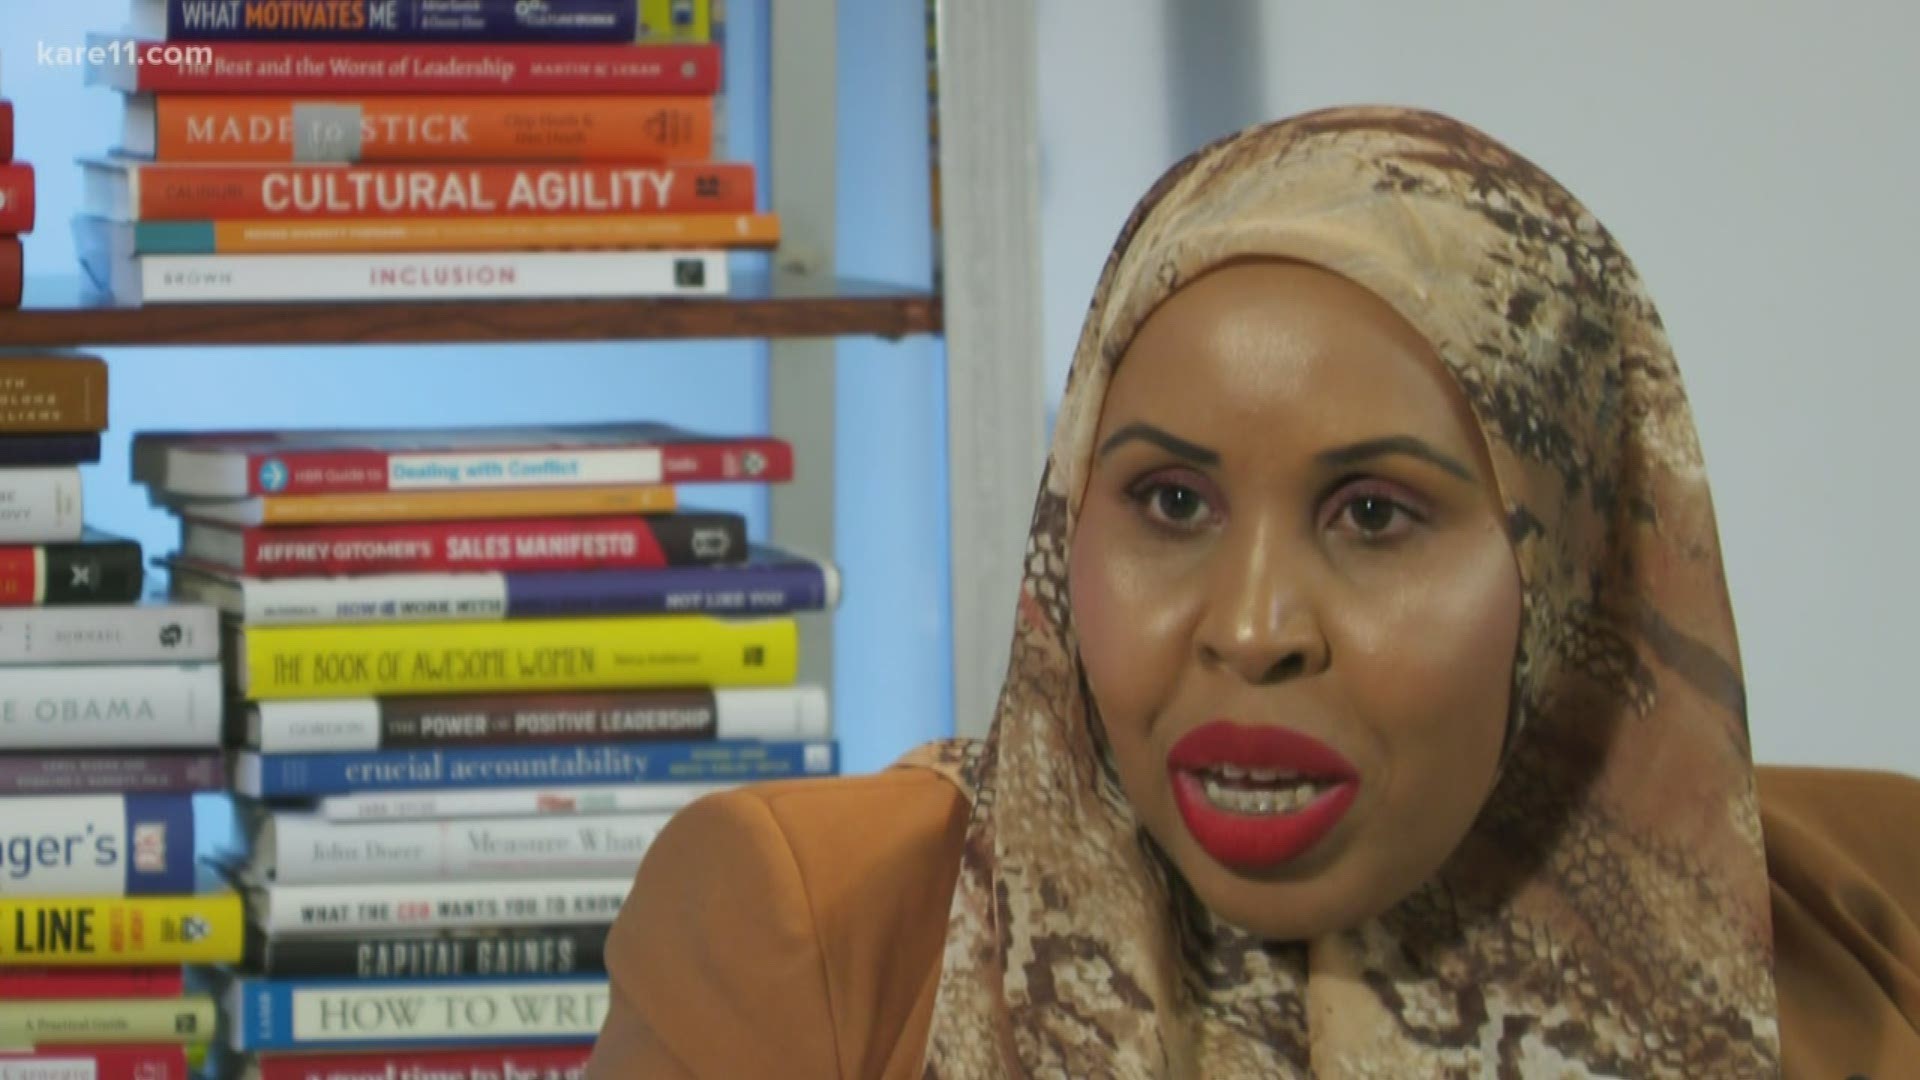 Hudda Ibrahim said when she didn't see any books with characters wearing hijabs, she wanted to write her own.